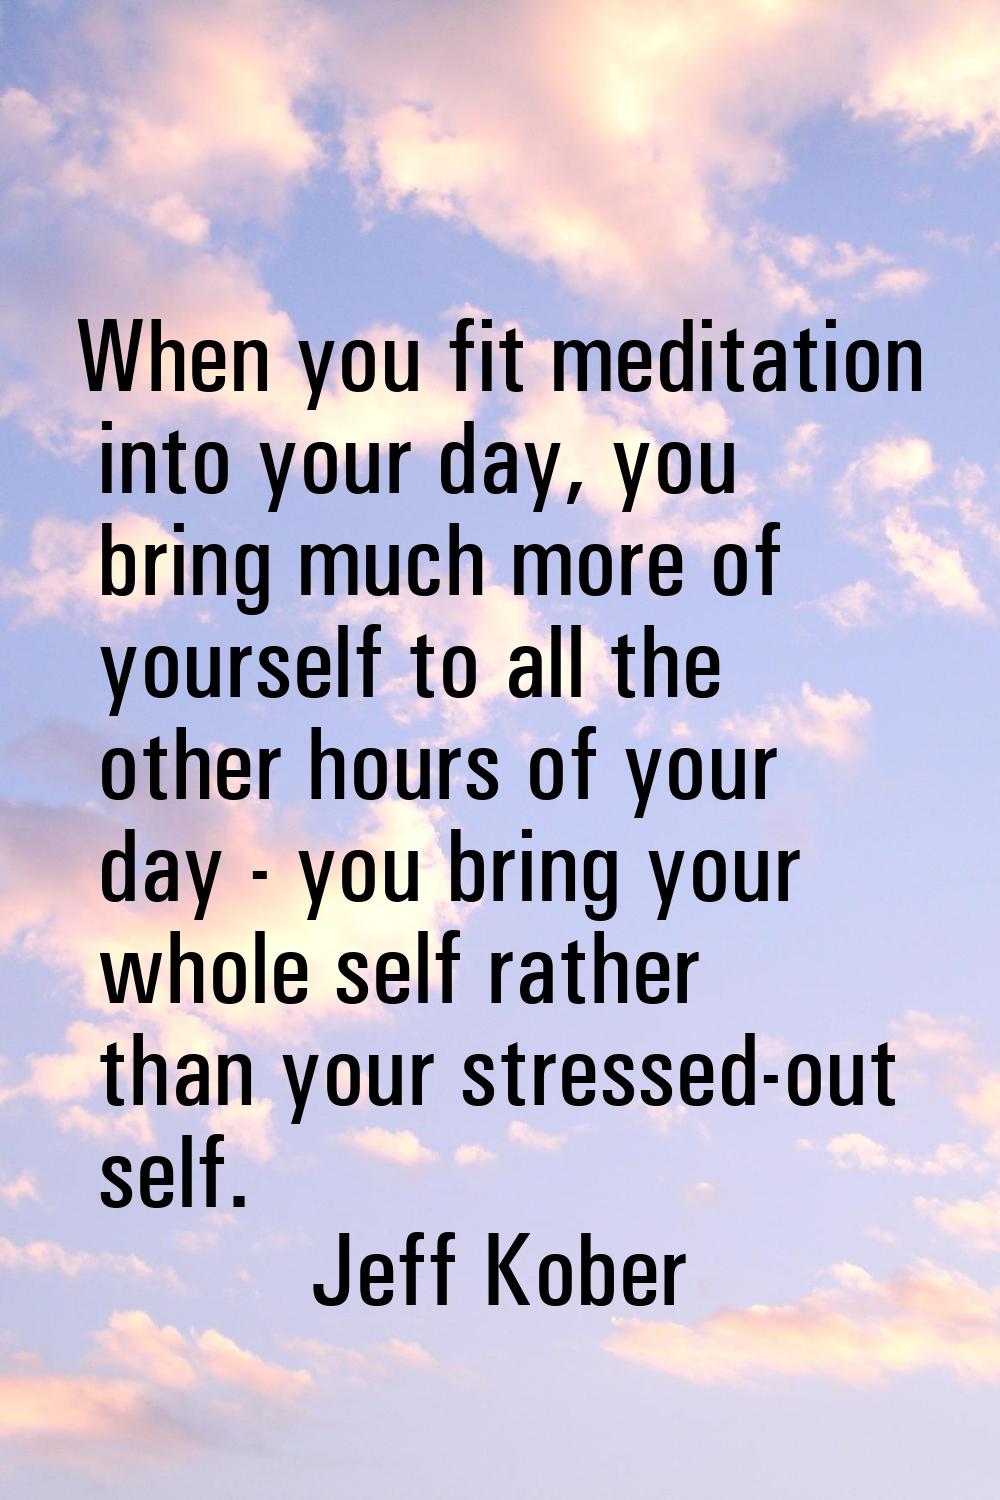 When you fit meditation into your day, you bring much more of yourself to all the other hours of yo